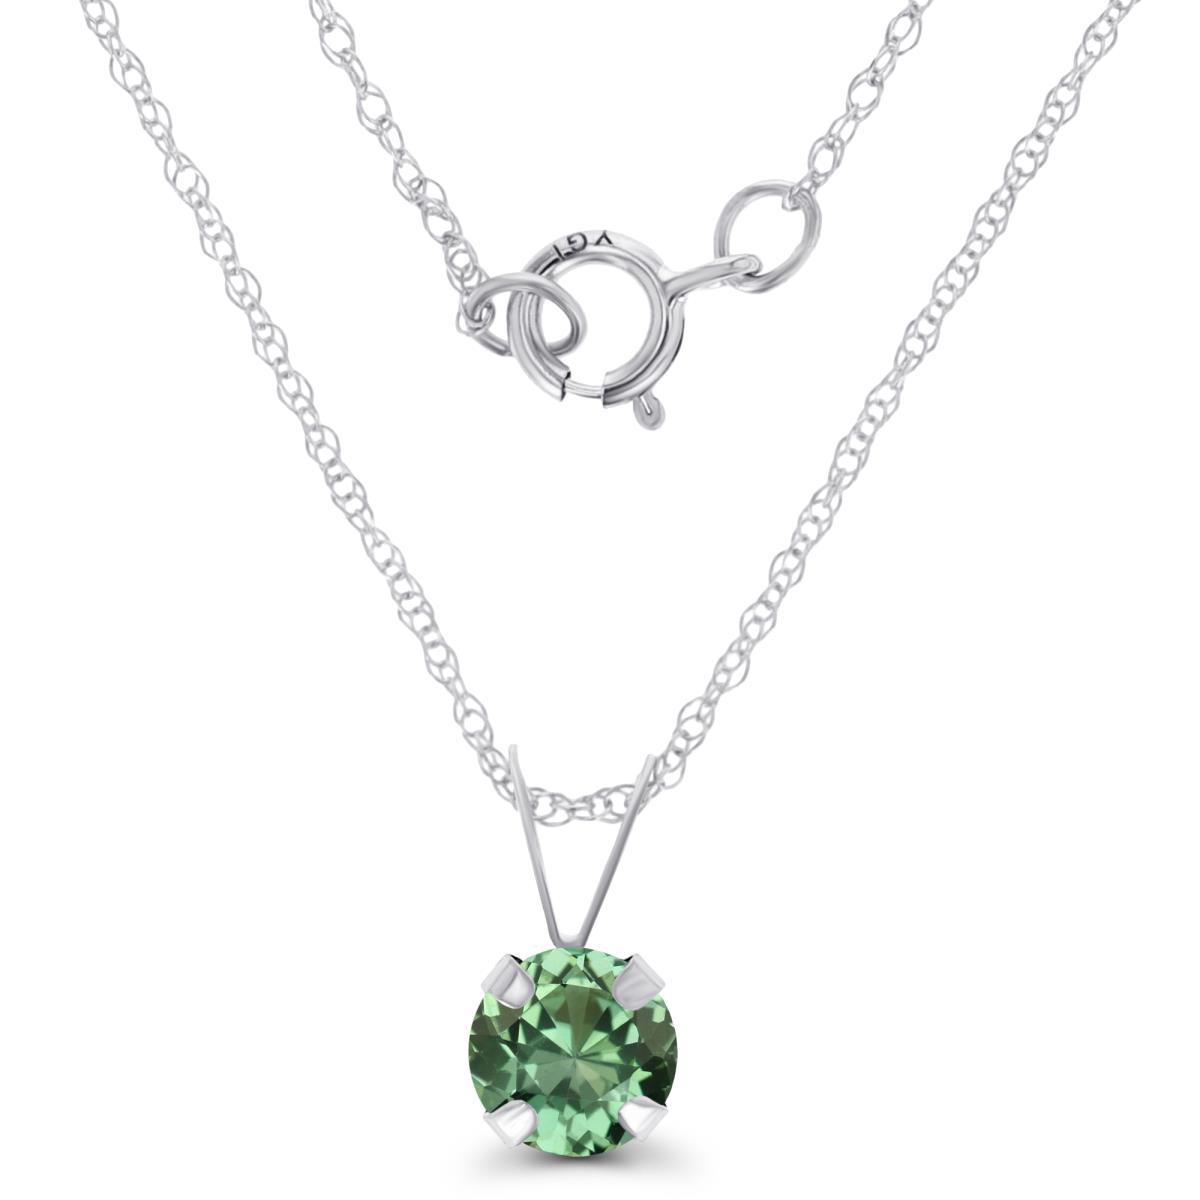 14K White Gold 5mm Round Cr Green Sapphire 18" Rope Chain Necklace